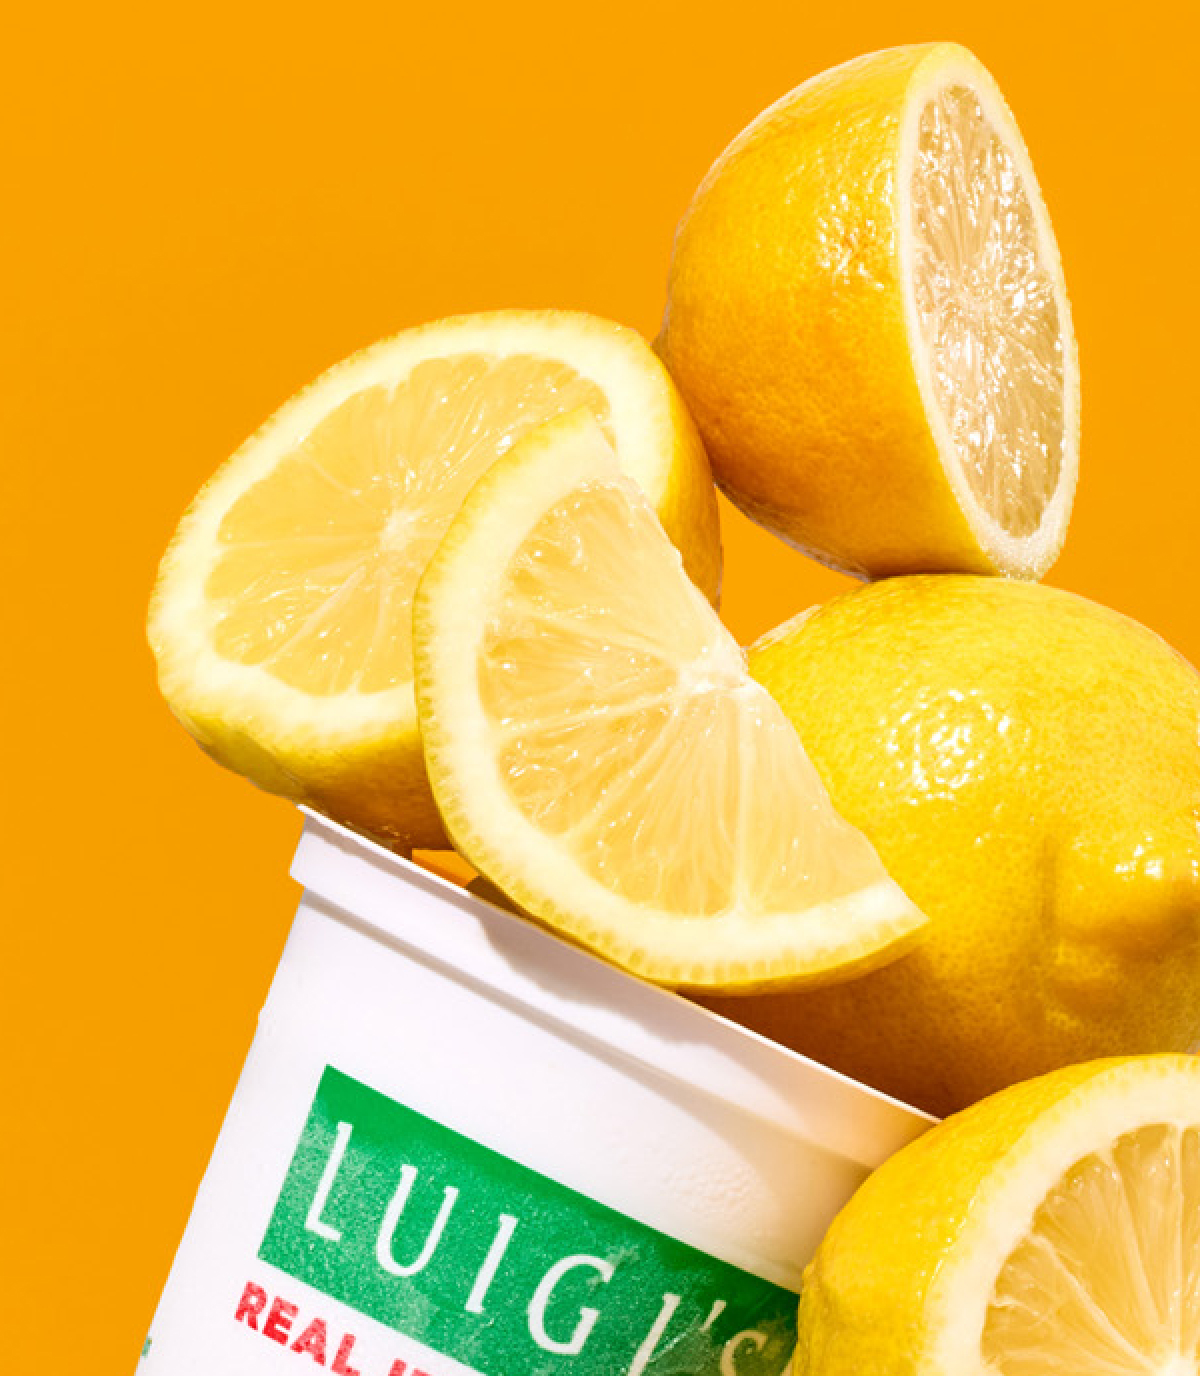 Cropped in close up of a LUIGI'S Real Italian Ice with lemon slices piled on top. Background is yellow.